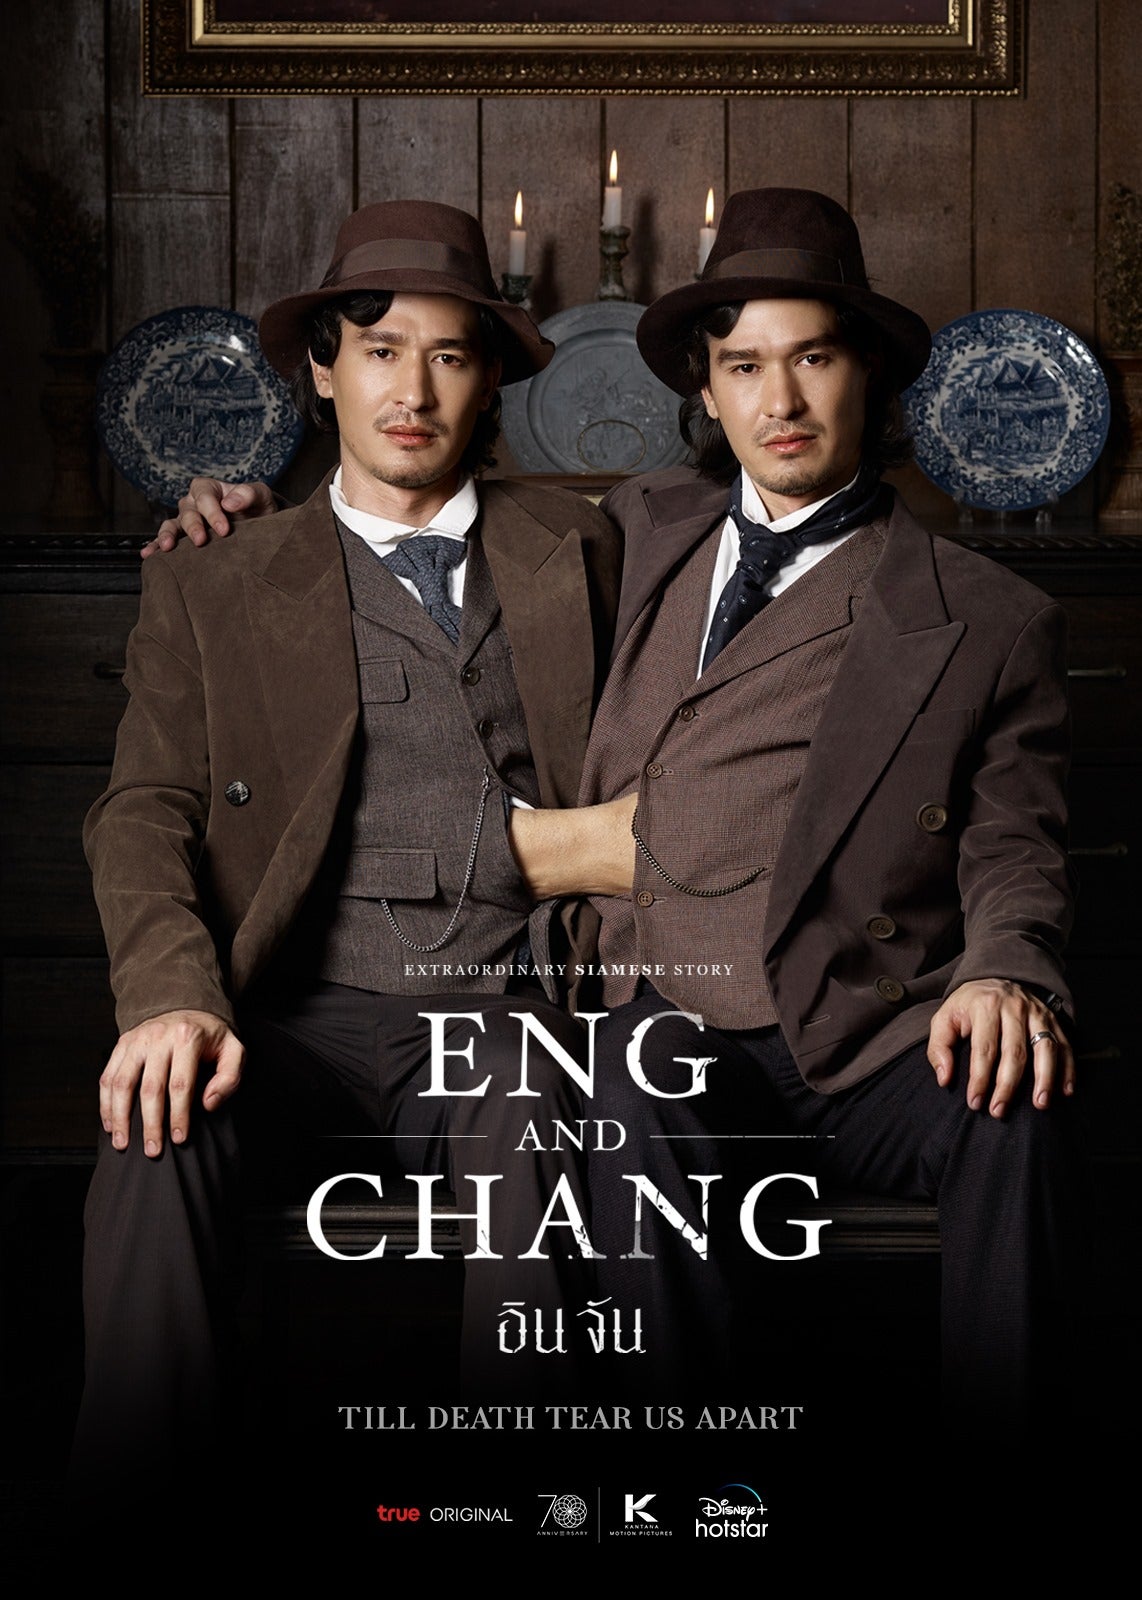 TV ratings for Extraordinary Siamese Story: Eng And Chang (อินจัน) in Thailand. Disney+ TV series